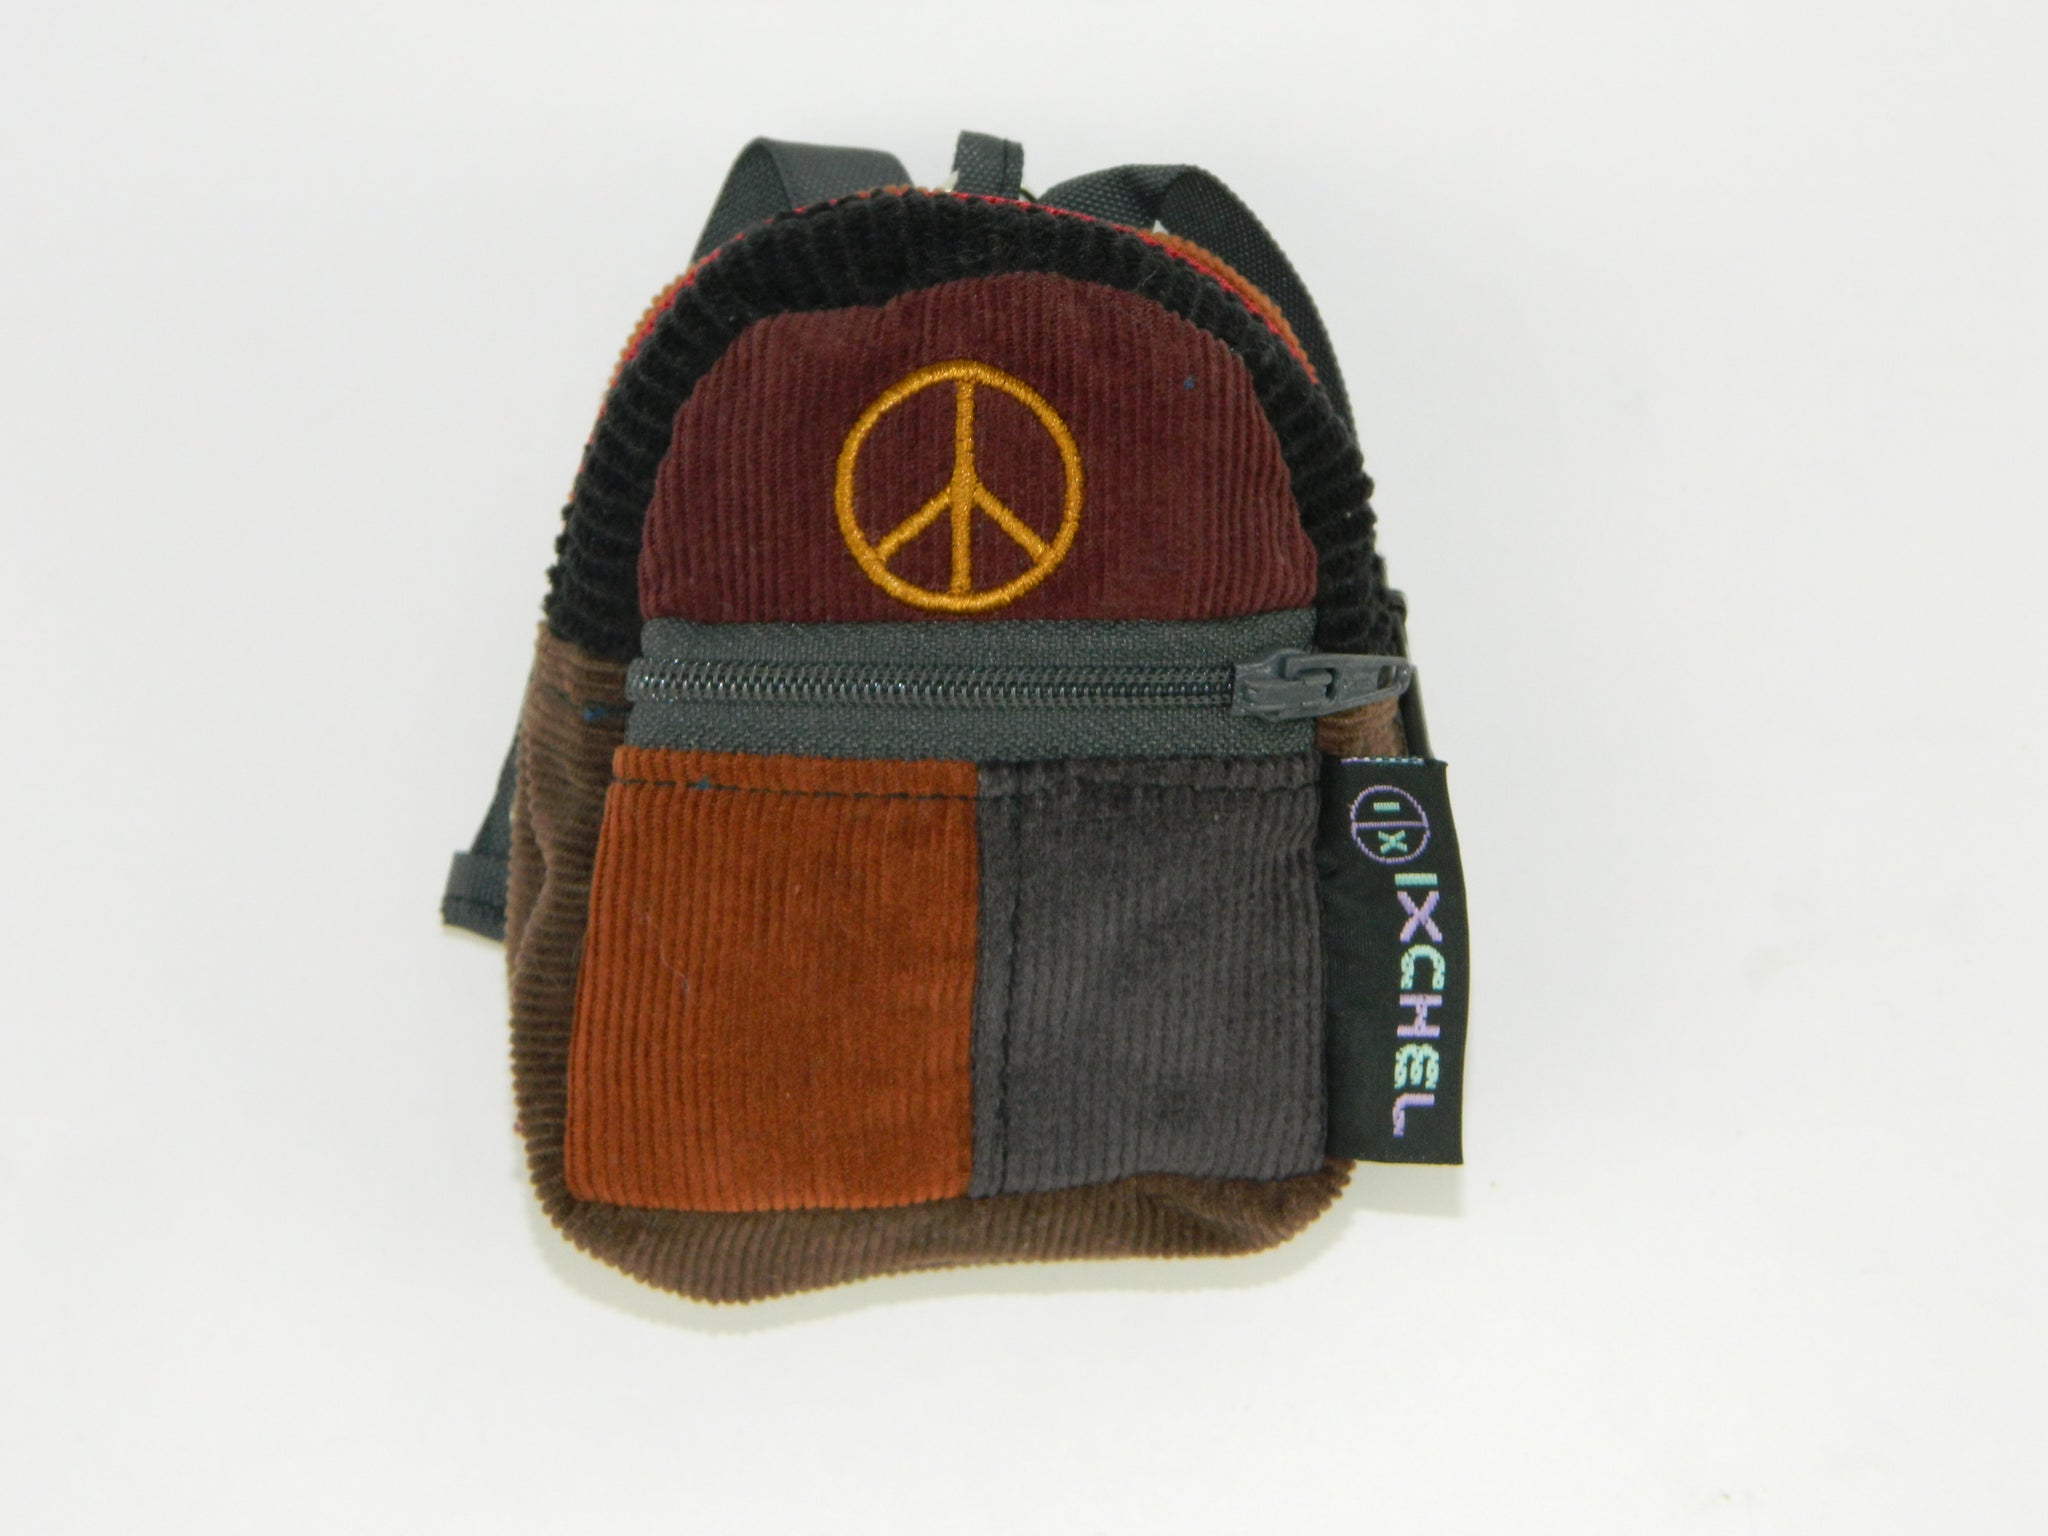 Patchwork Corduroy Micro Backpack with Peace Sign Embroidery